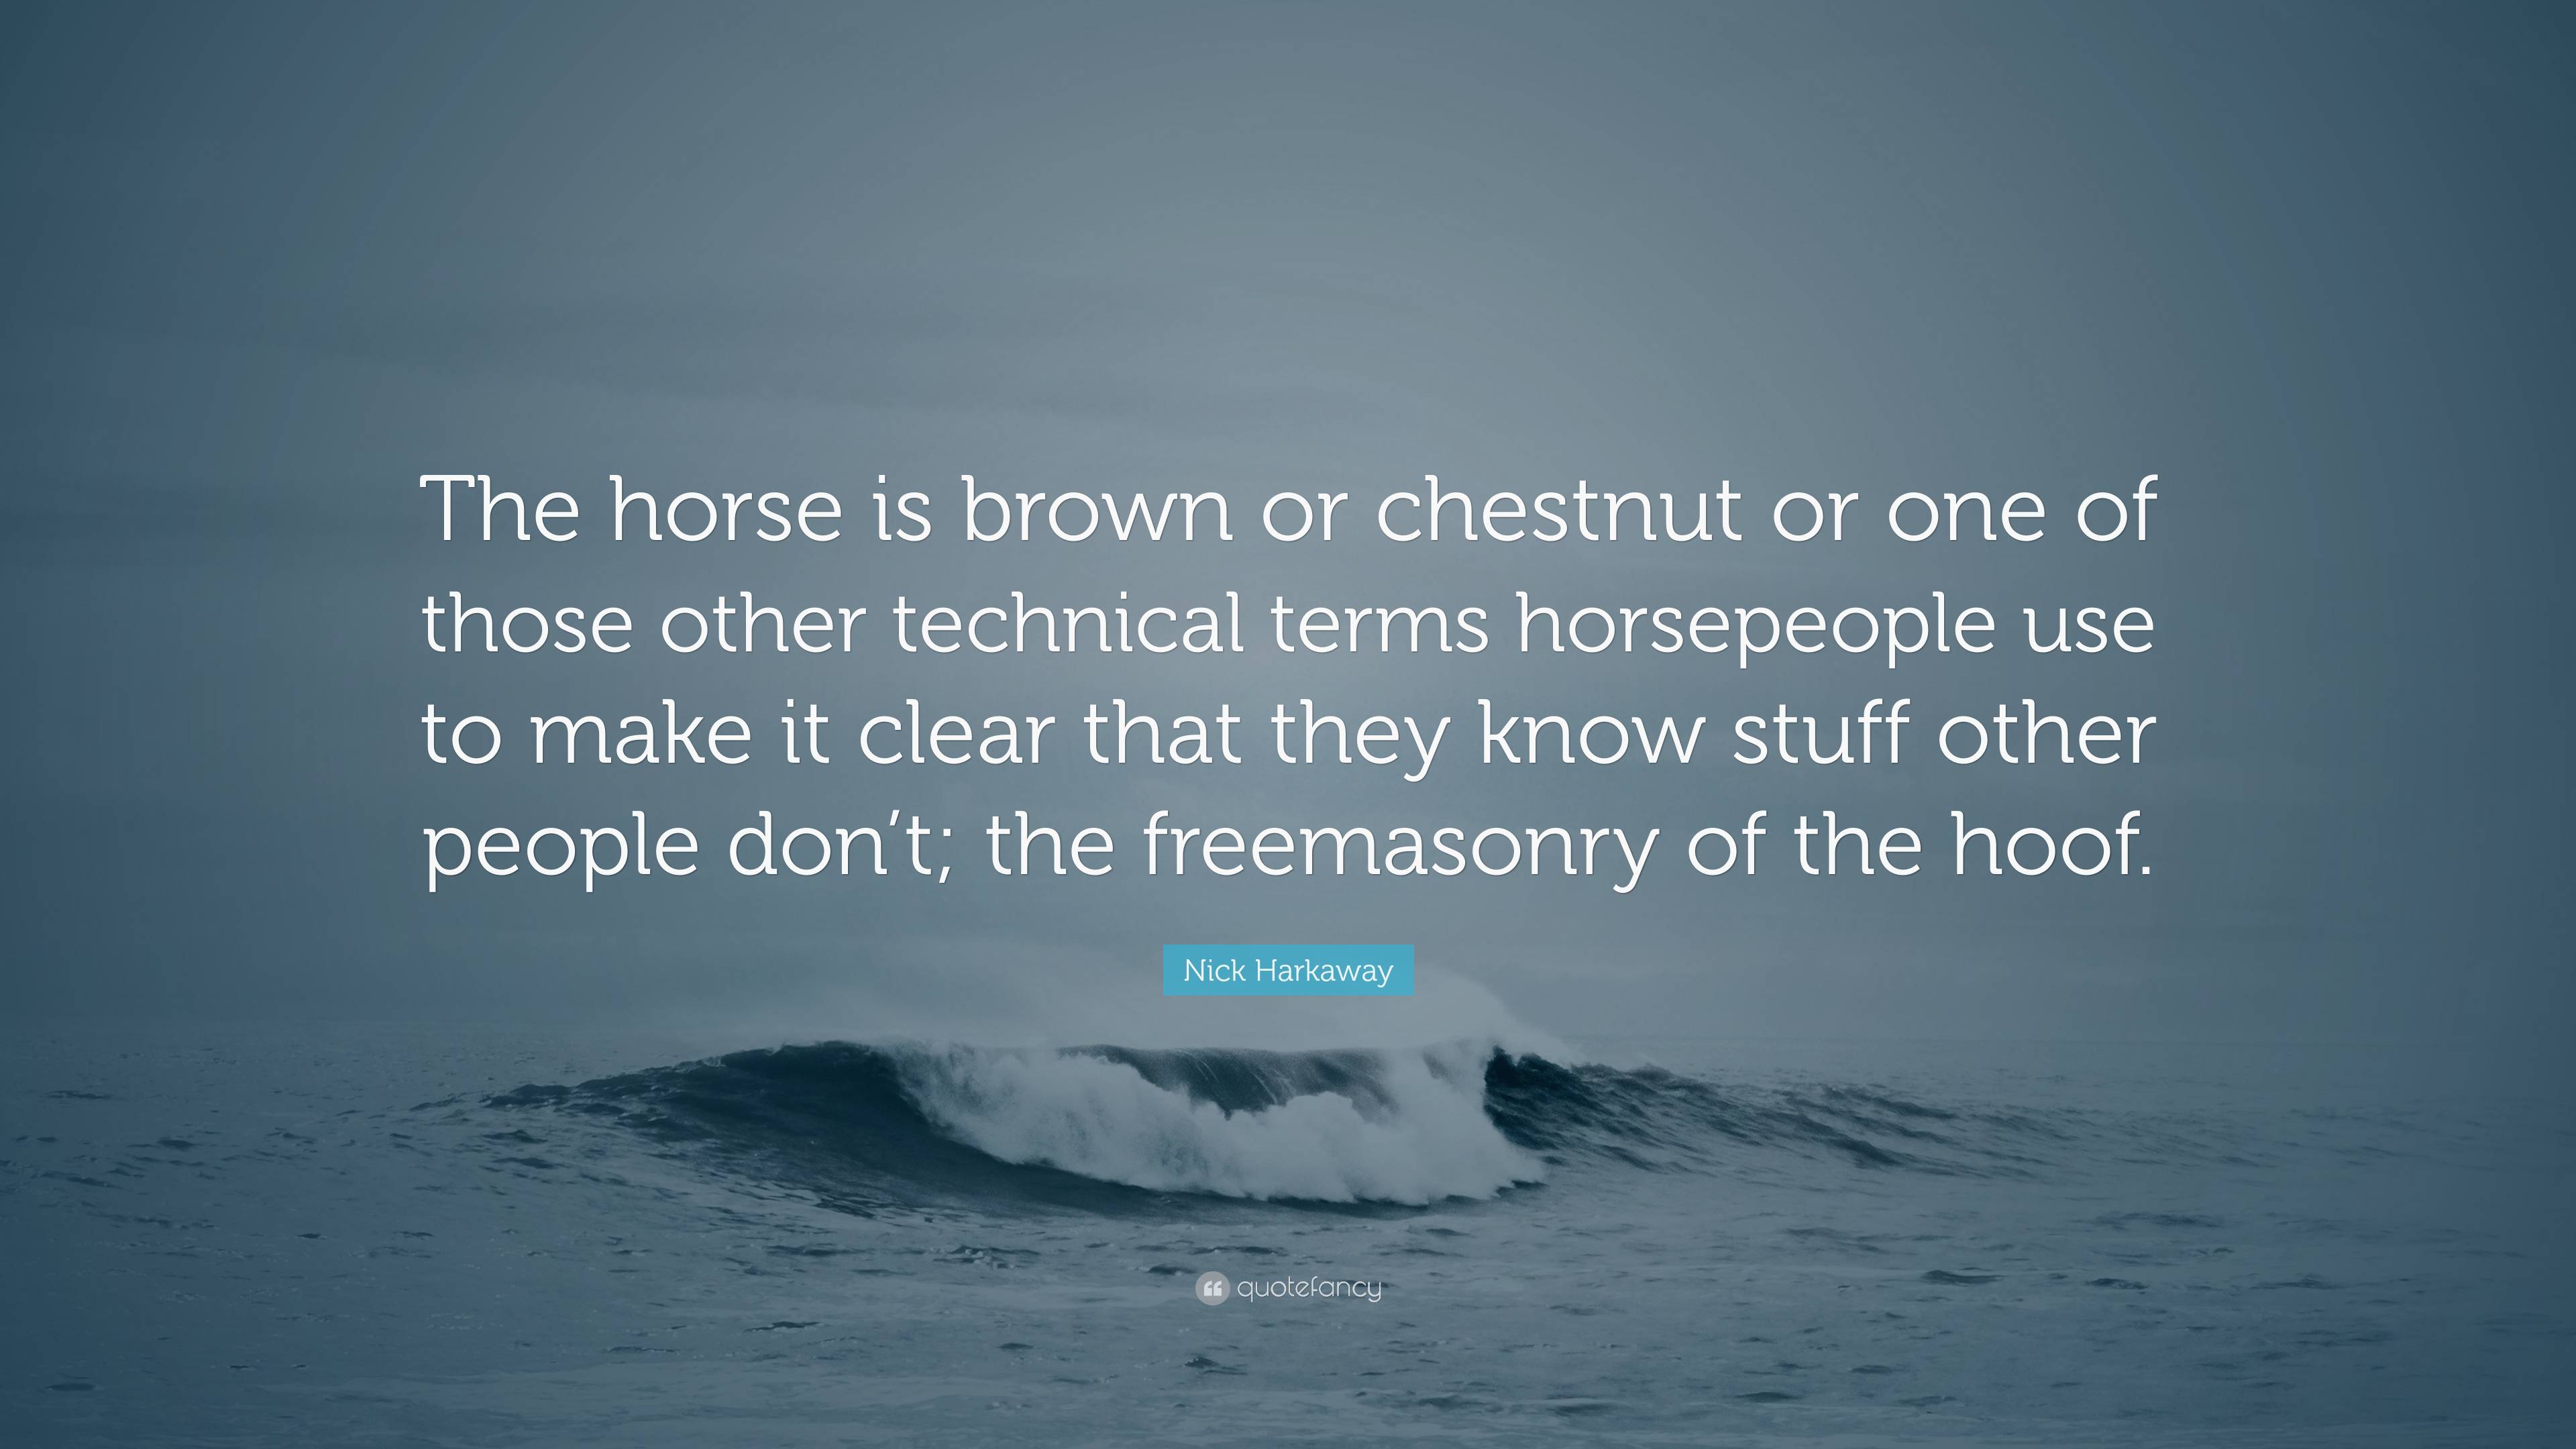 https://quotefancy.com/media/wallpaper/3840x2160/7379949-Nick-Harkaway-Quote-The-horse-is-brown-or-chestnut-or-one-of-those.jpg